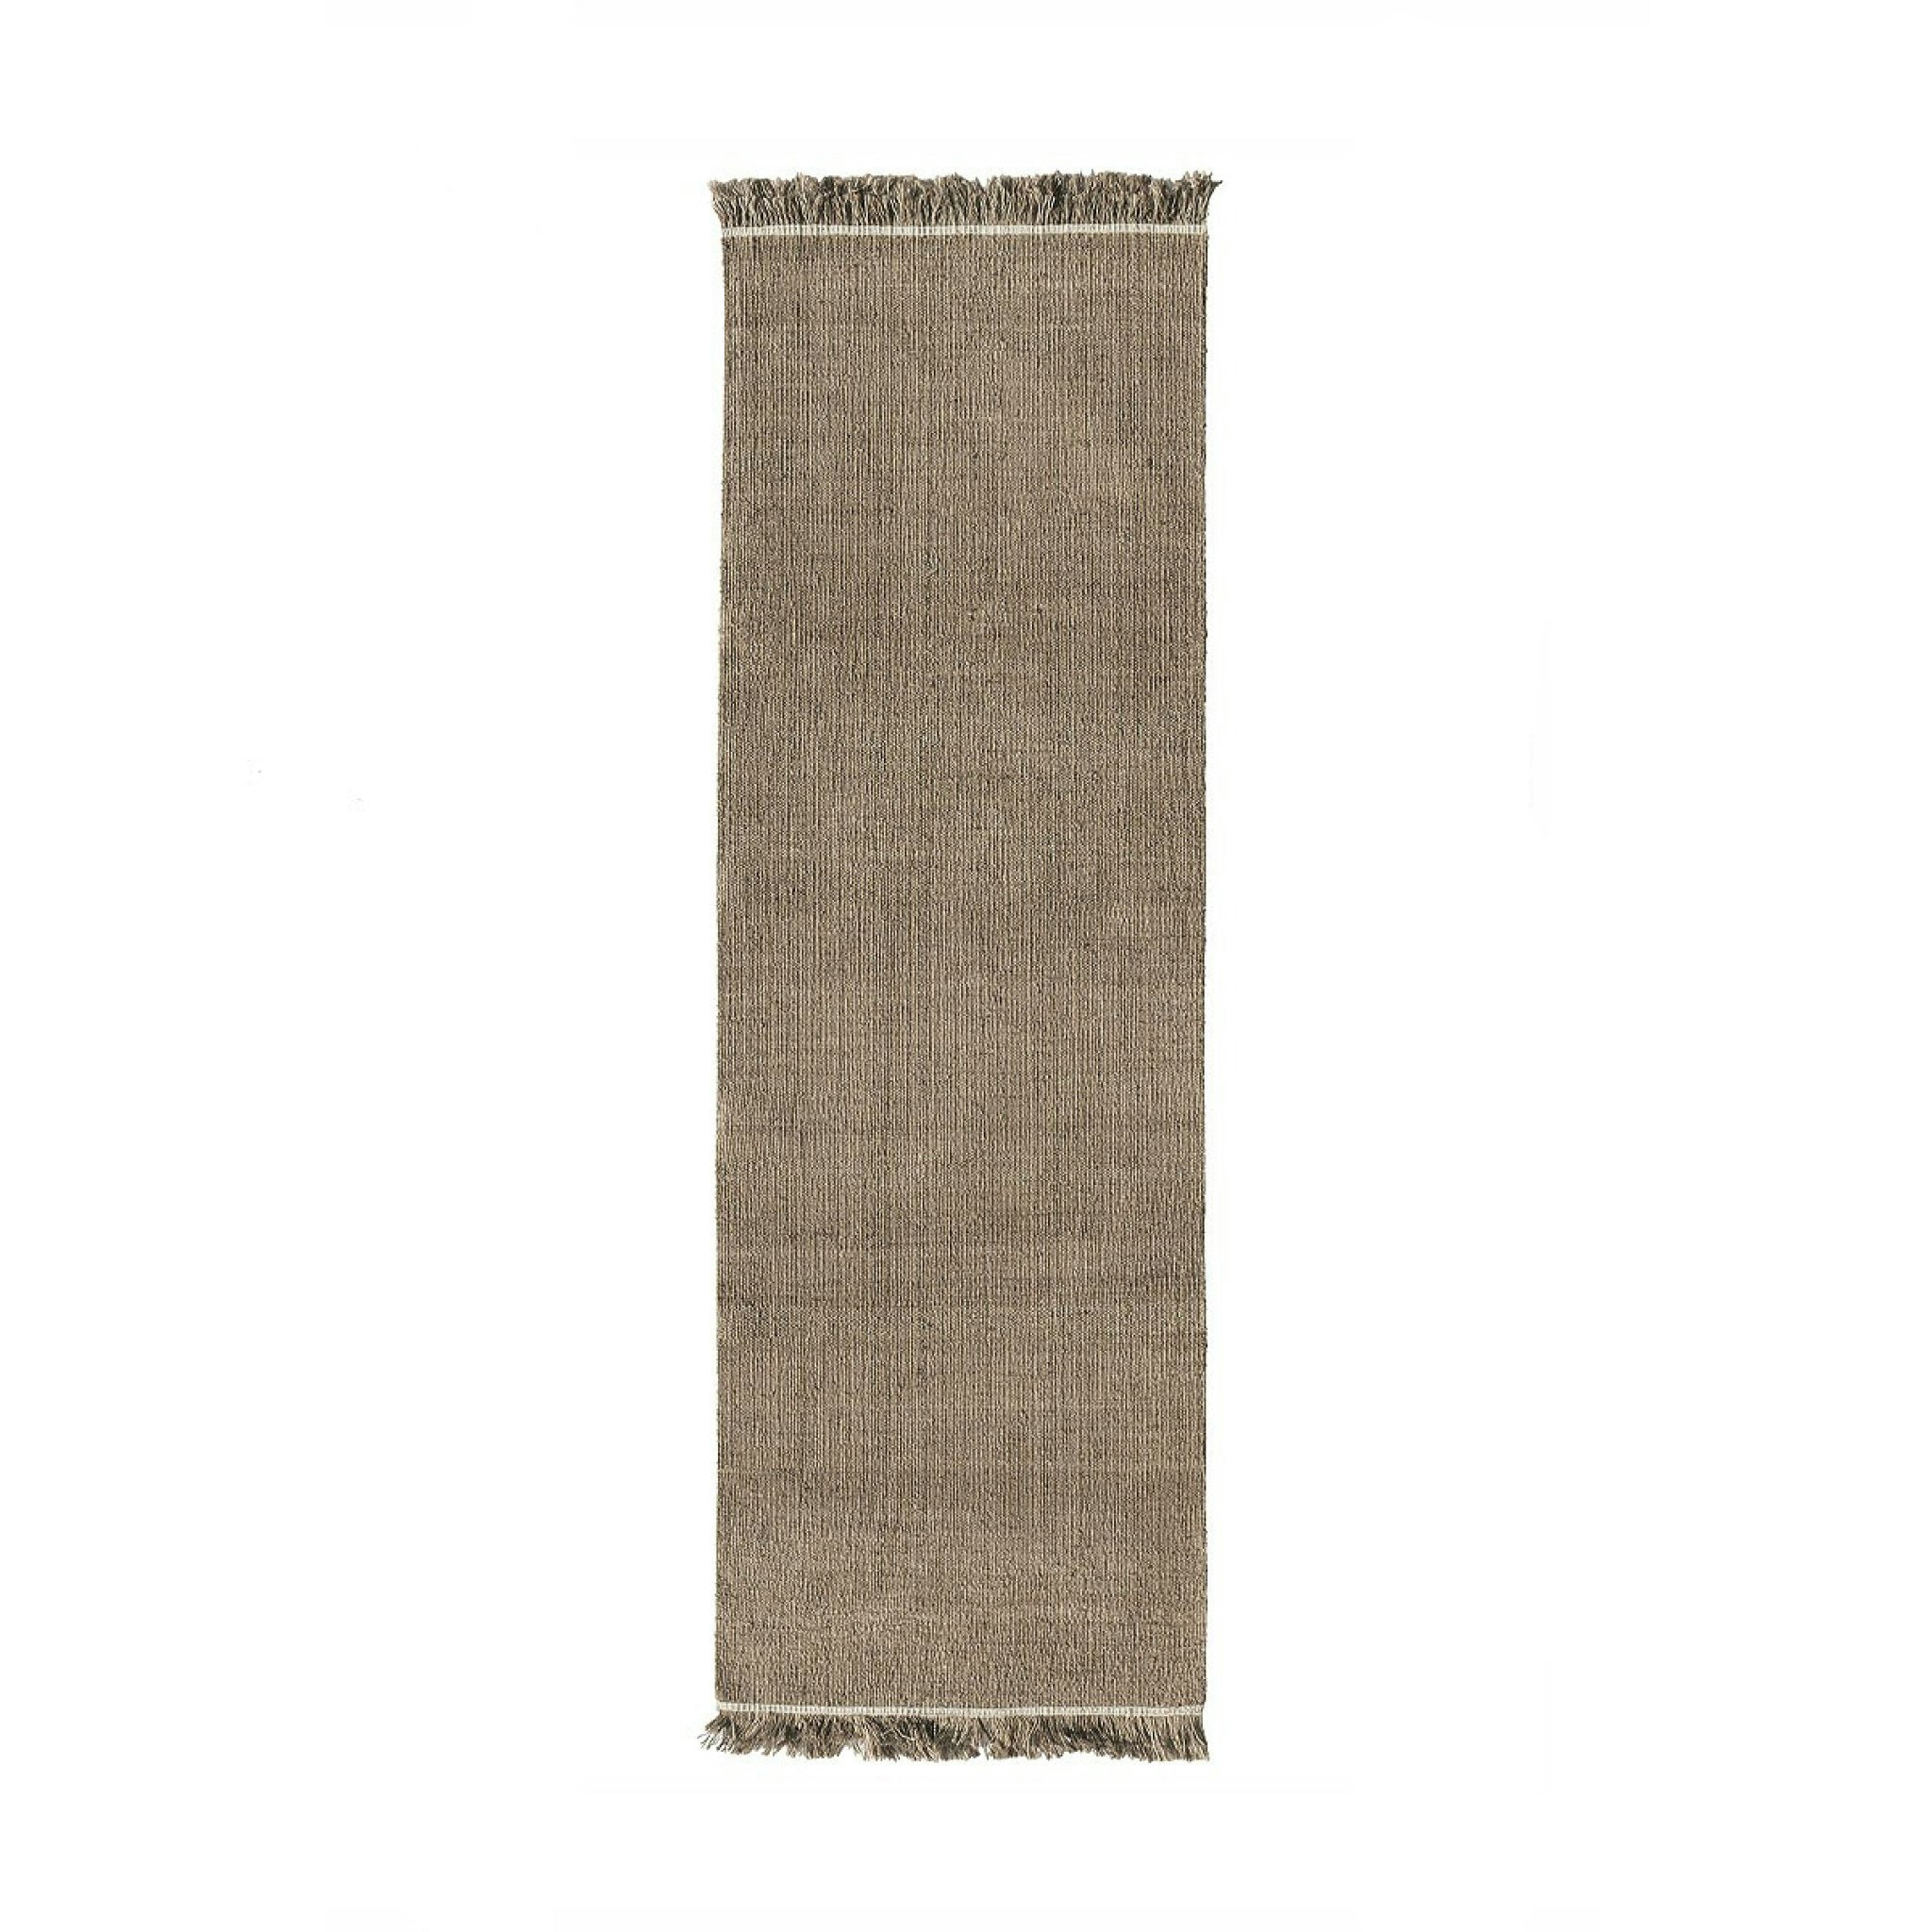 Wellbeing Nettle Dhurrie Rug by Nanimarquina